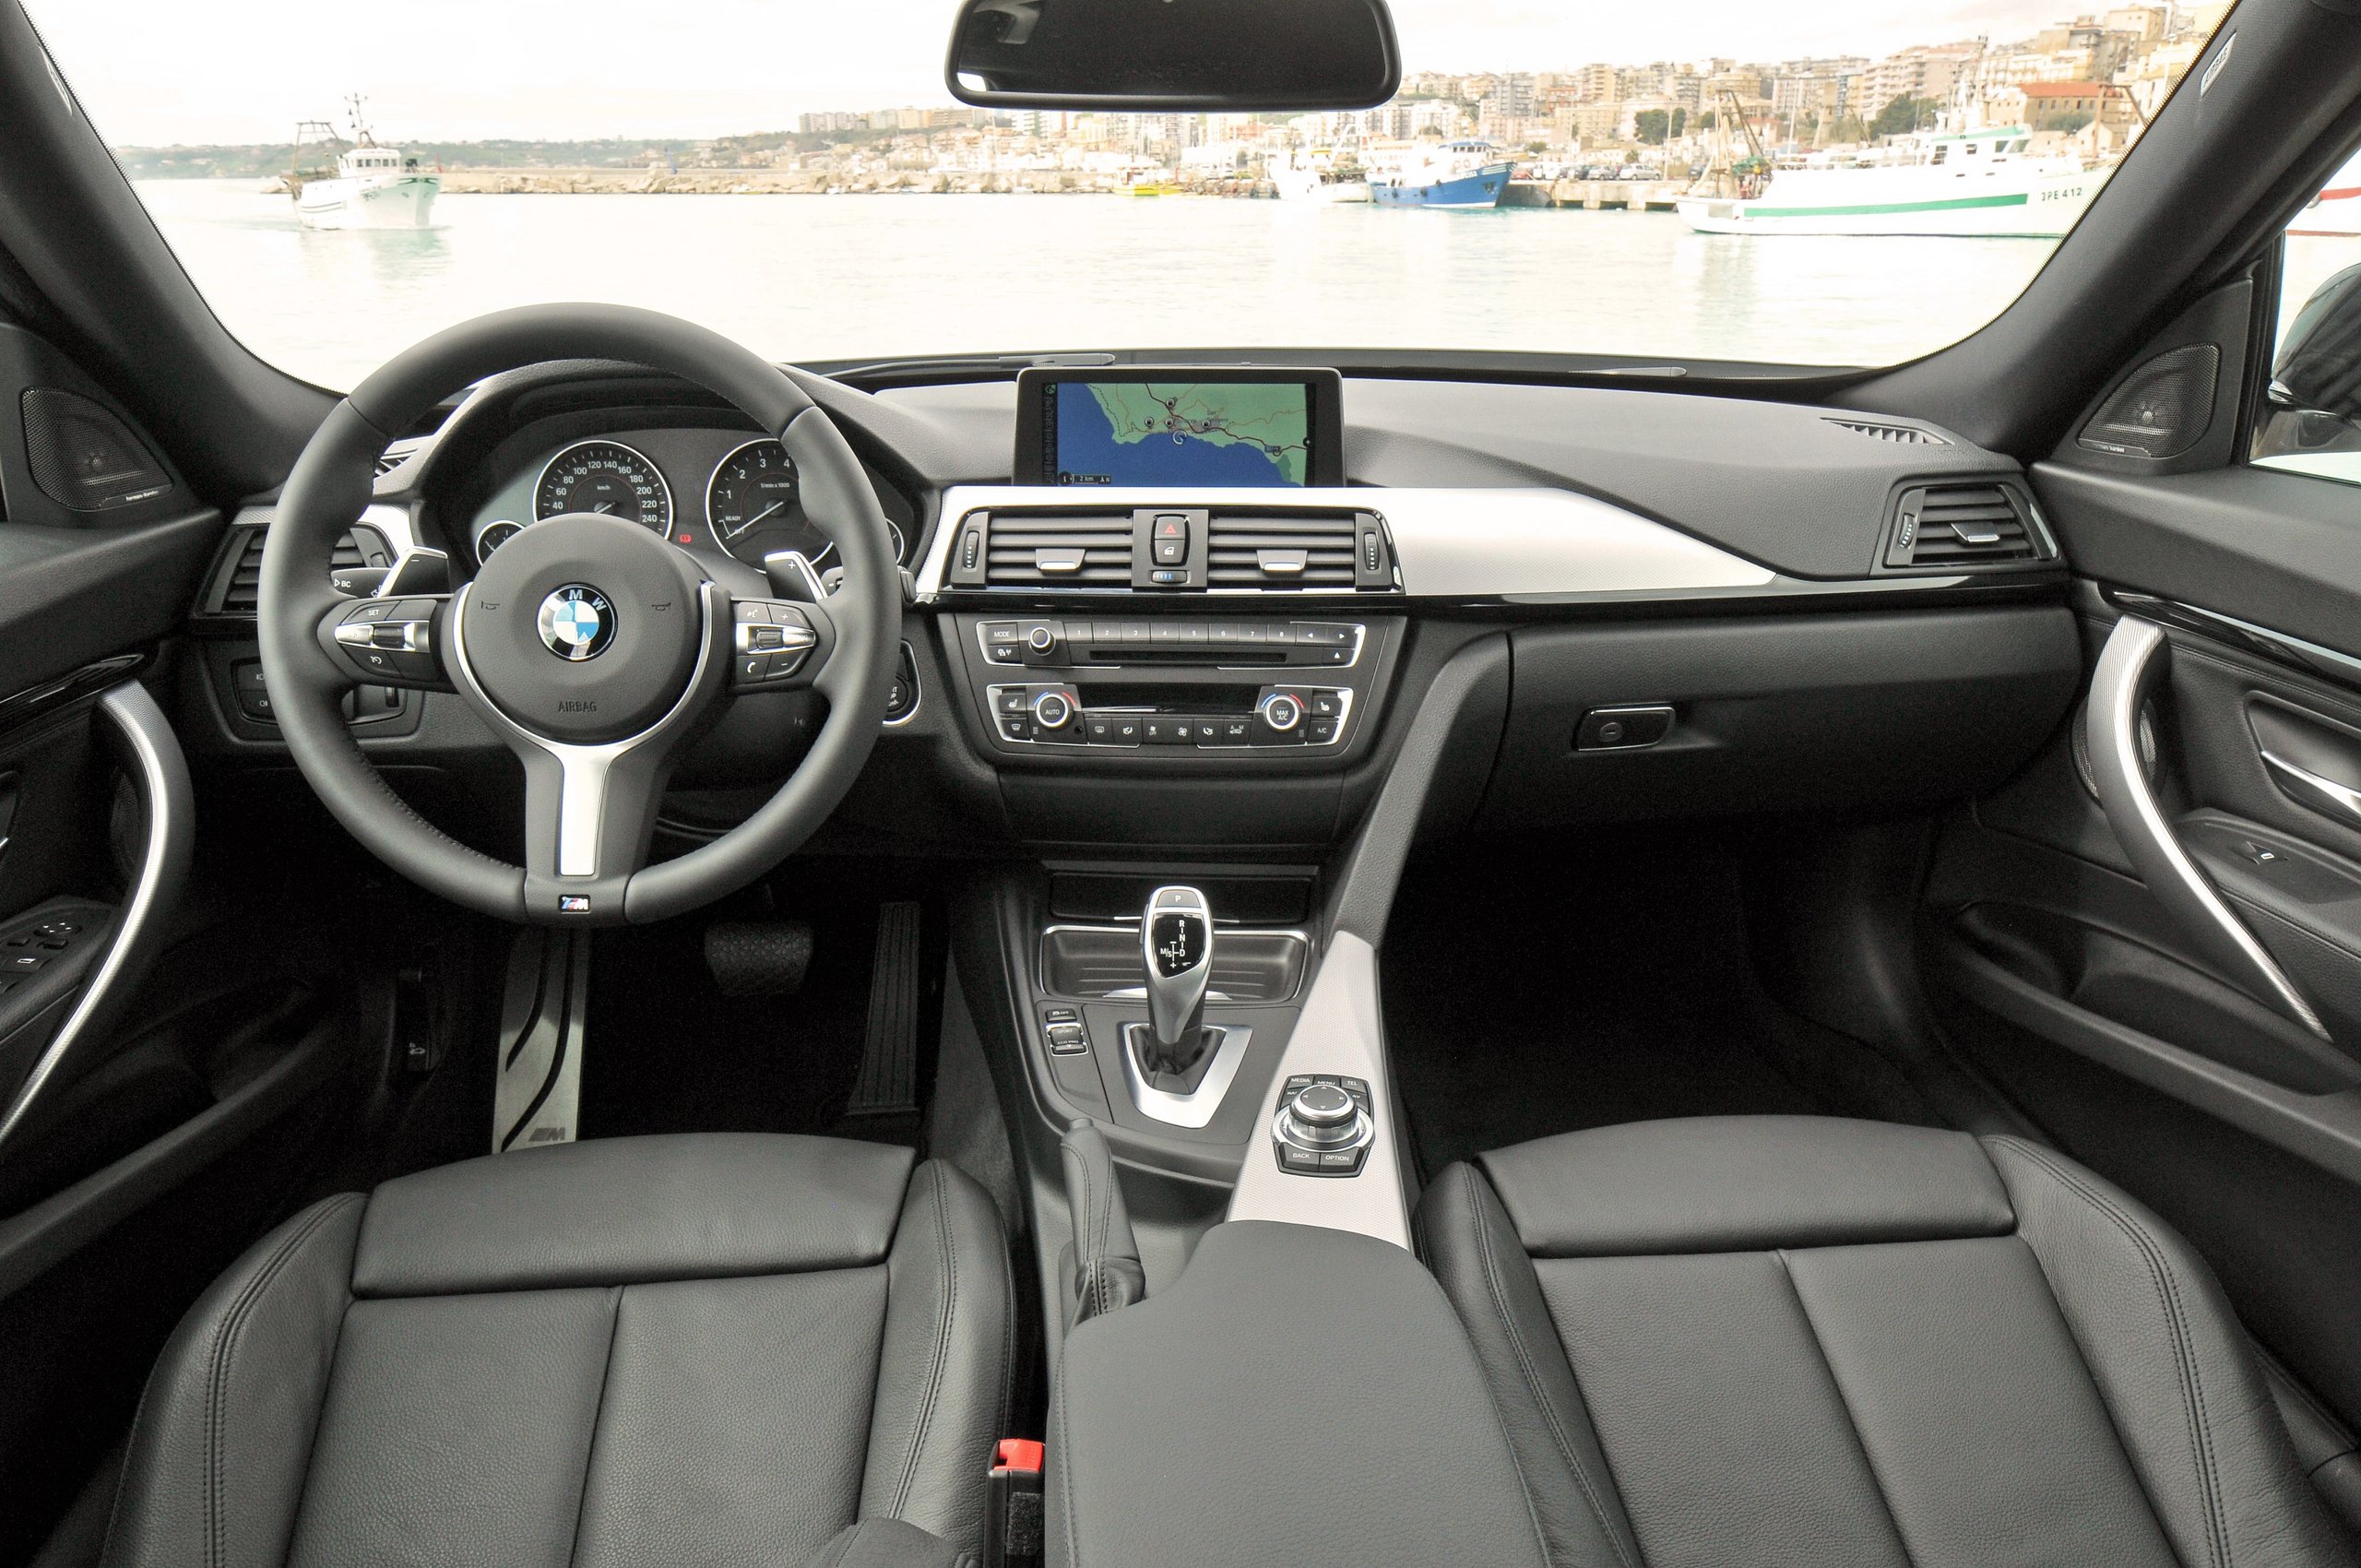 BMW 3 Series Gran Turismo Backgrounds, Compatible - PC, Mobile, Gadgets| 2560x1700 px